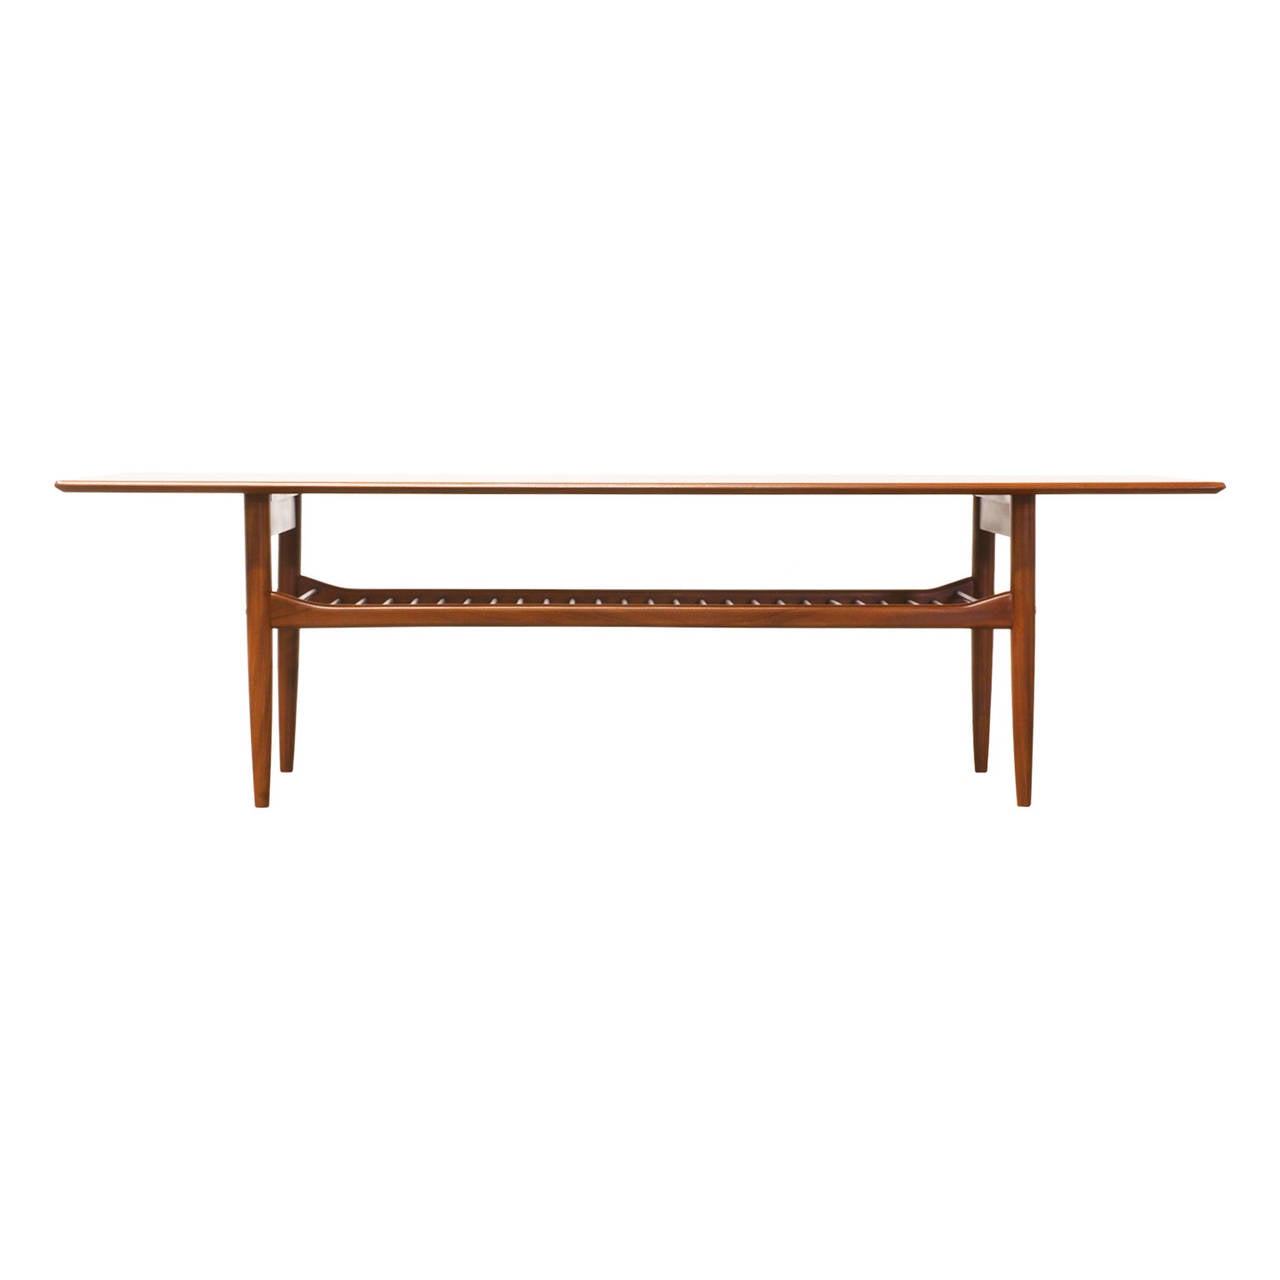 Designer: Ib Kofod Larsen
Manufacturer: G-Plan
Period/Style: Mid Century Modern
Country: England
Date: 1960’s

Dimensions: 17″H x 83″L x 23.5″W
Materials: Teak
Condition: Excellent – Newly Refinished
Number of Items: 1
ID Number: PENDING